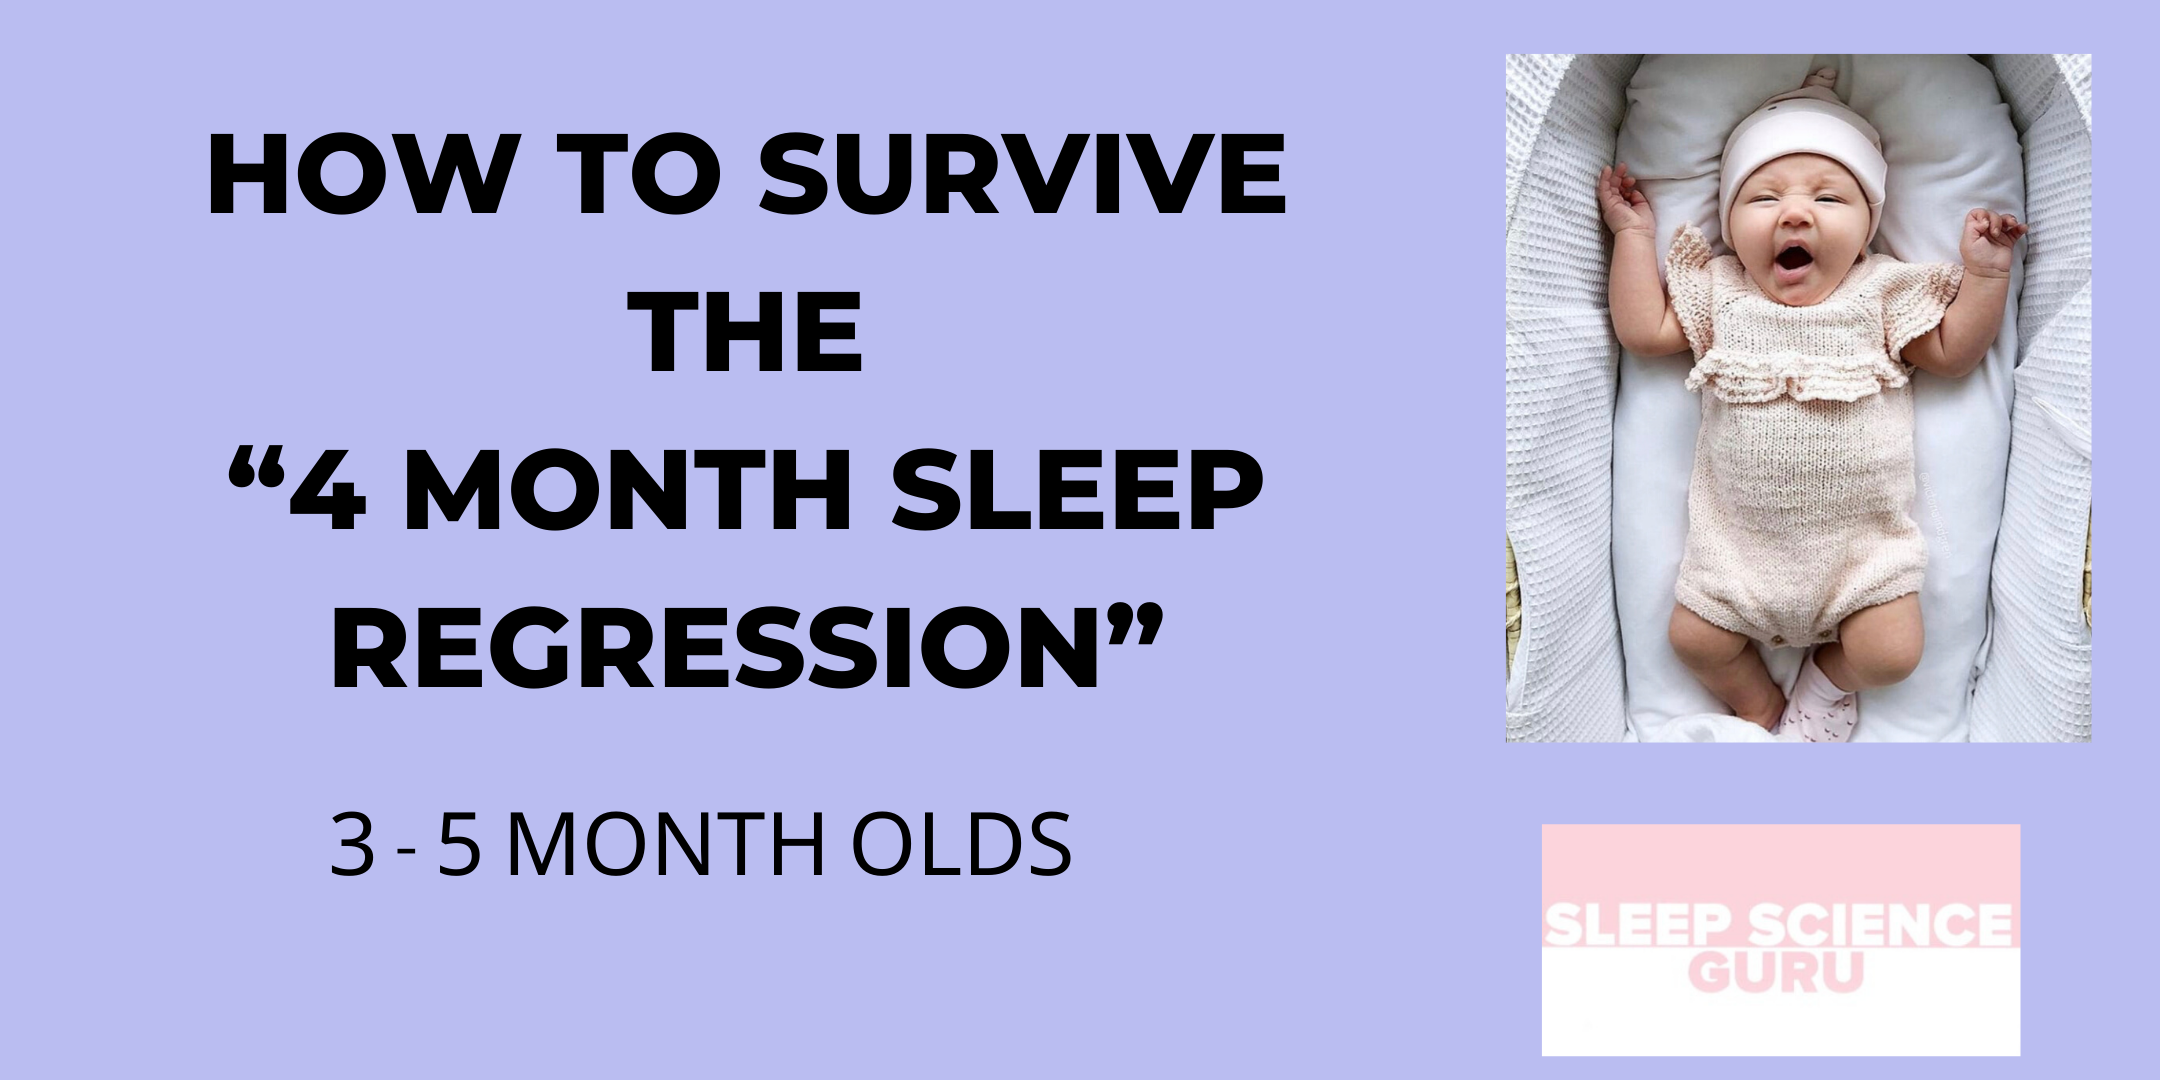 How to survive the 4 month sleep regression : for 3-5 month olds